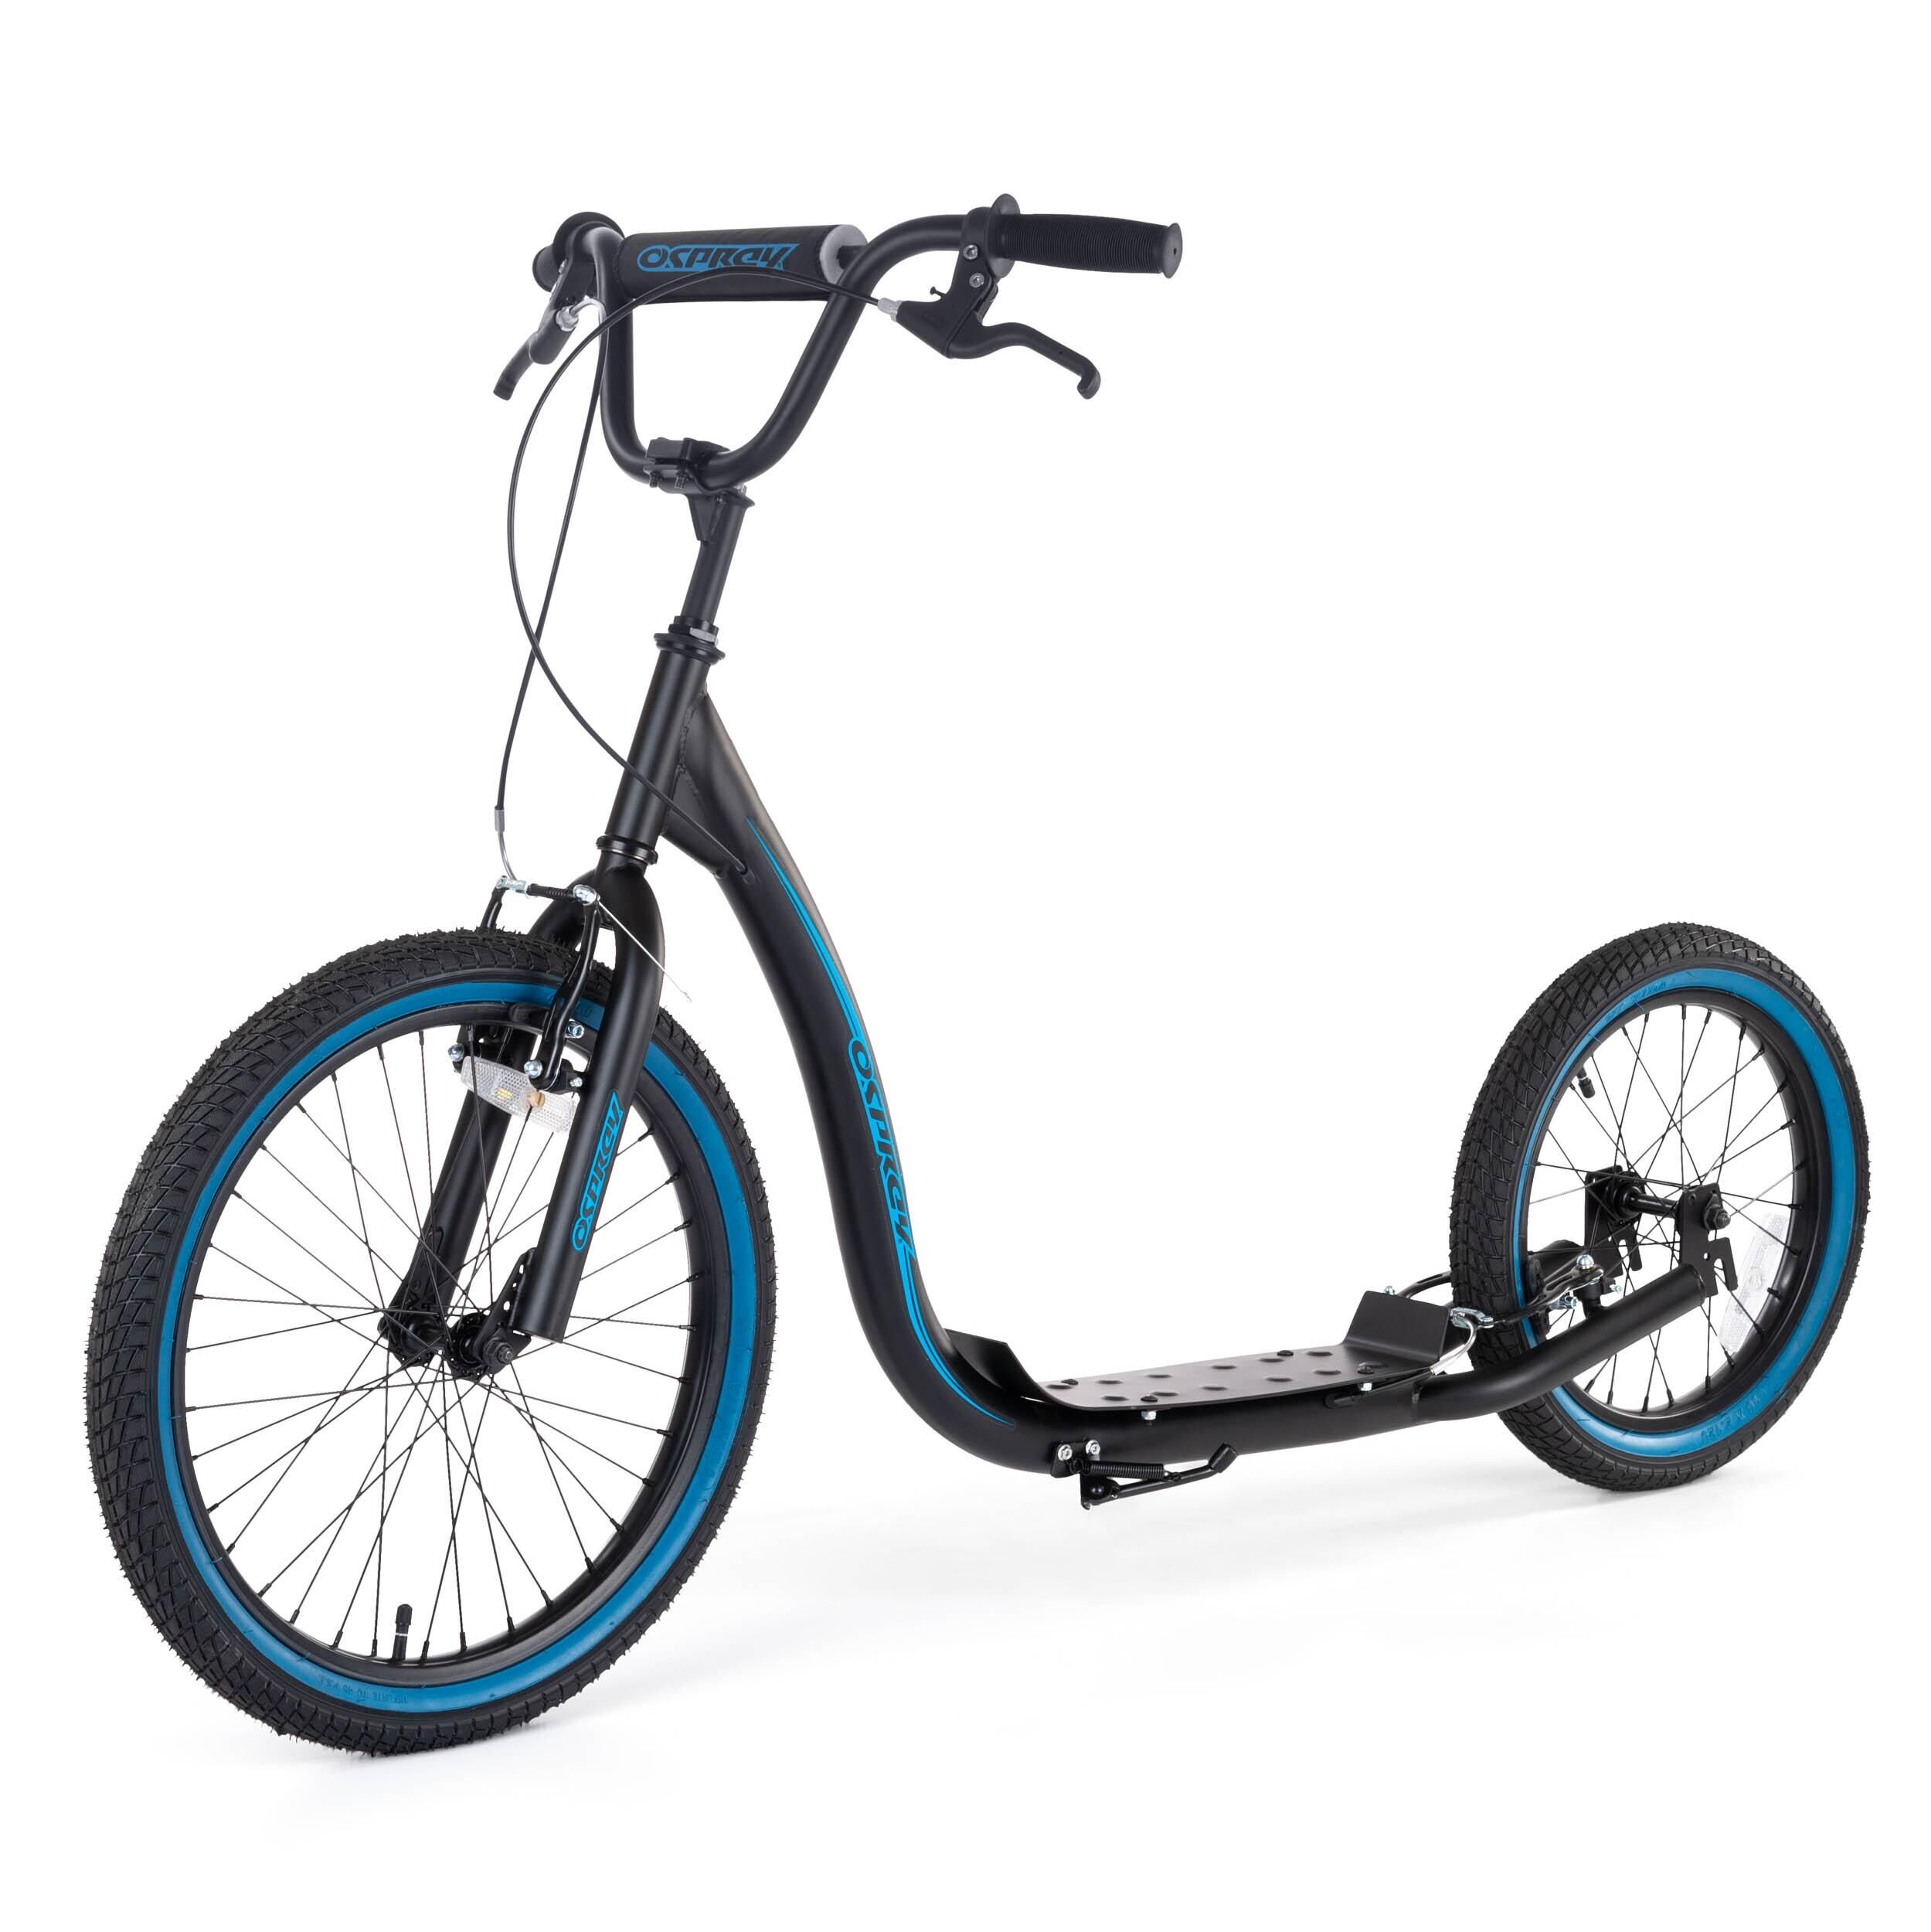 OSPREY ACTION SPORTS Osprey BMX Scooter, Off-Road Scooter Adult Scooter, Black